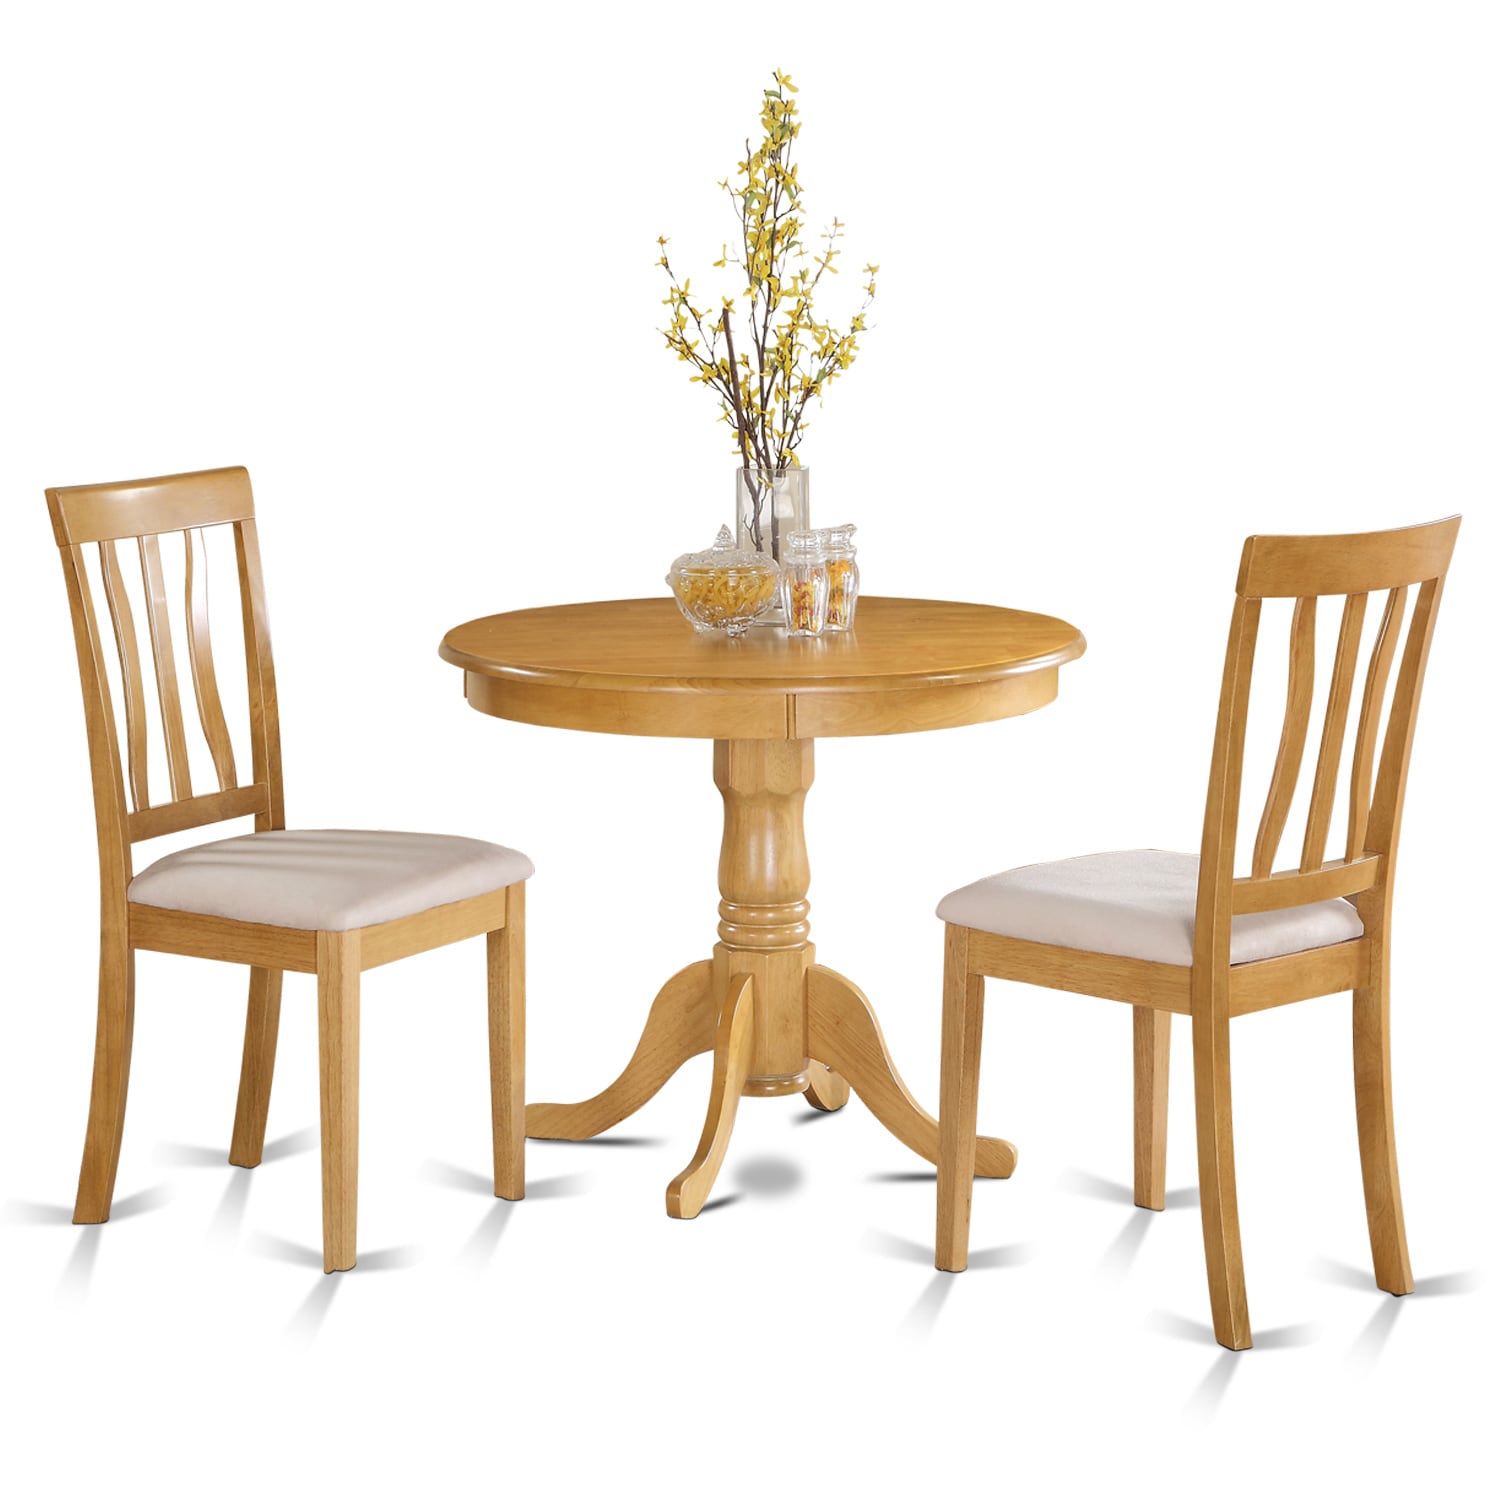 Shop Oak Small Kitchen Table Plus 2 Chairs 3 Piece Dining Set Free